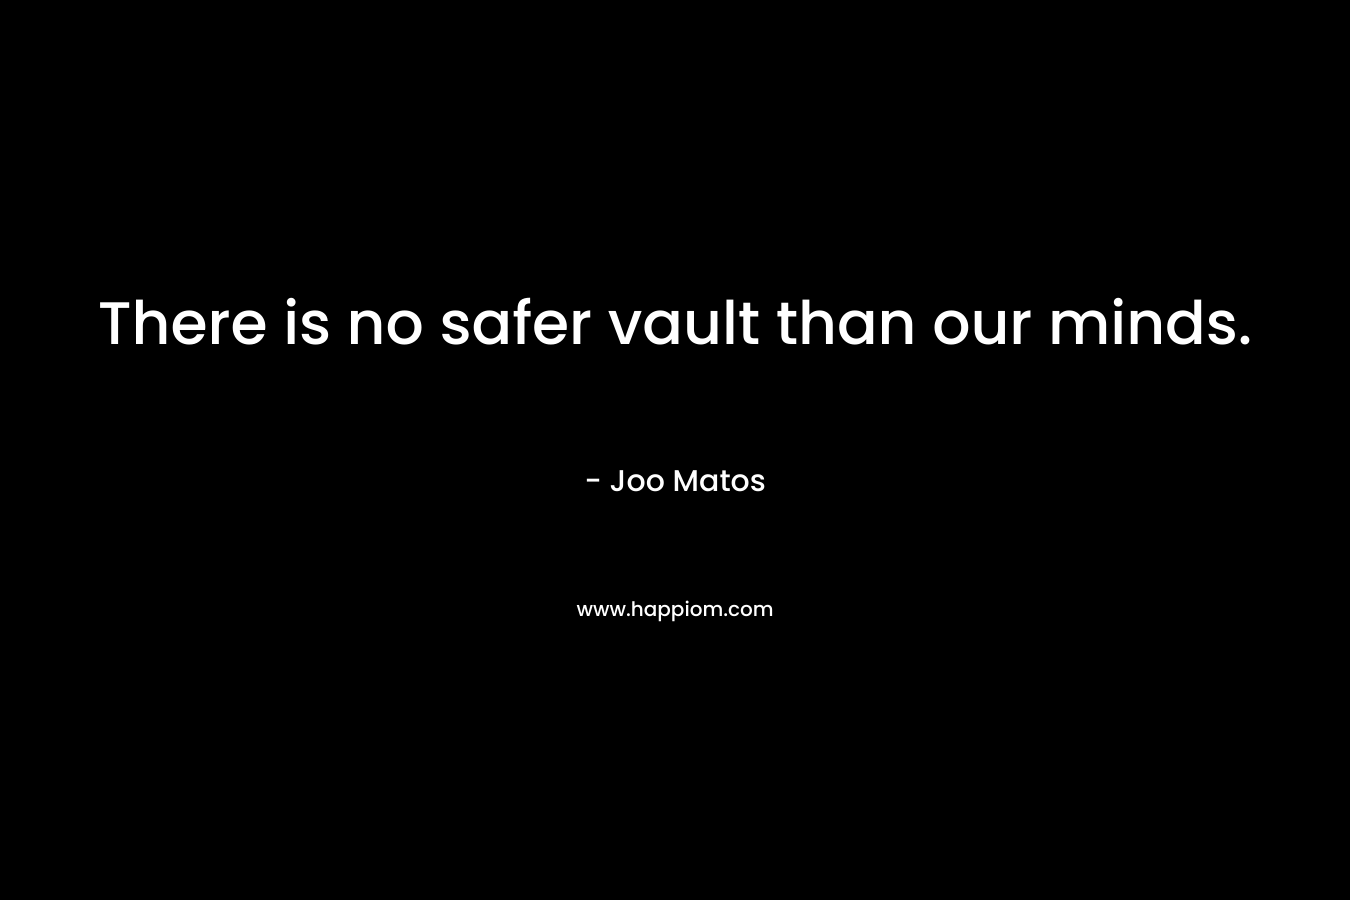 There is no safer vault than our minds.